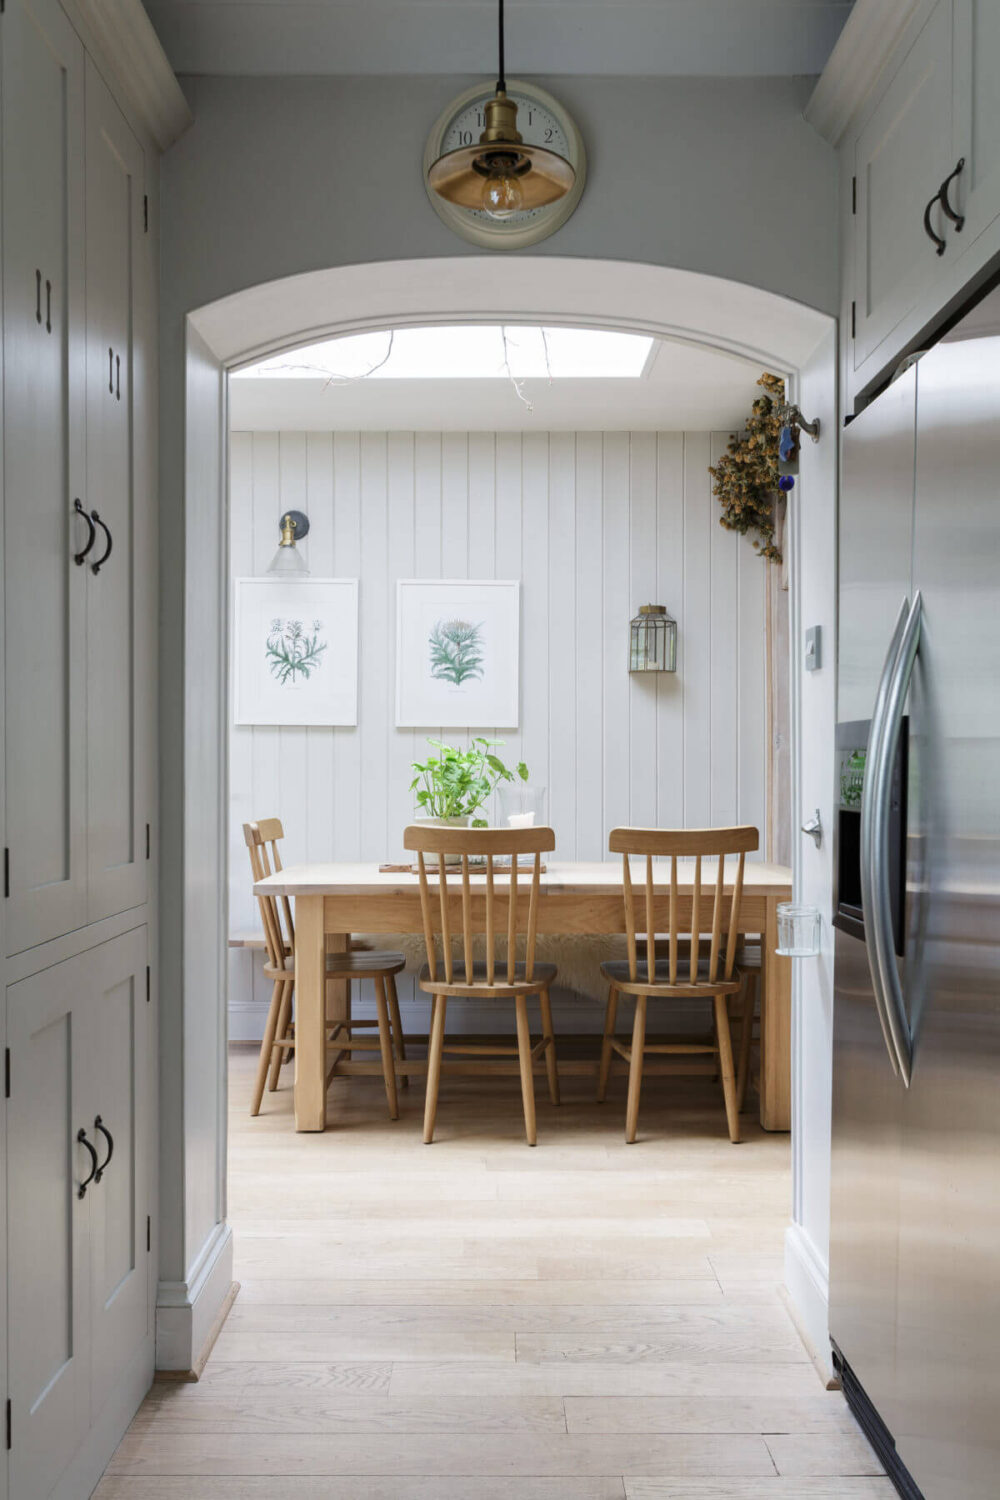 kitchen-dining-room-skylight-cottage-style-home-nordroom